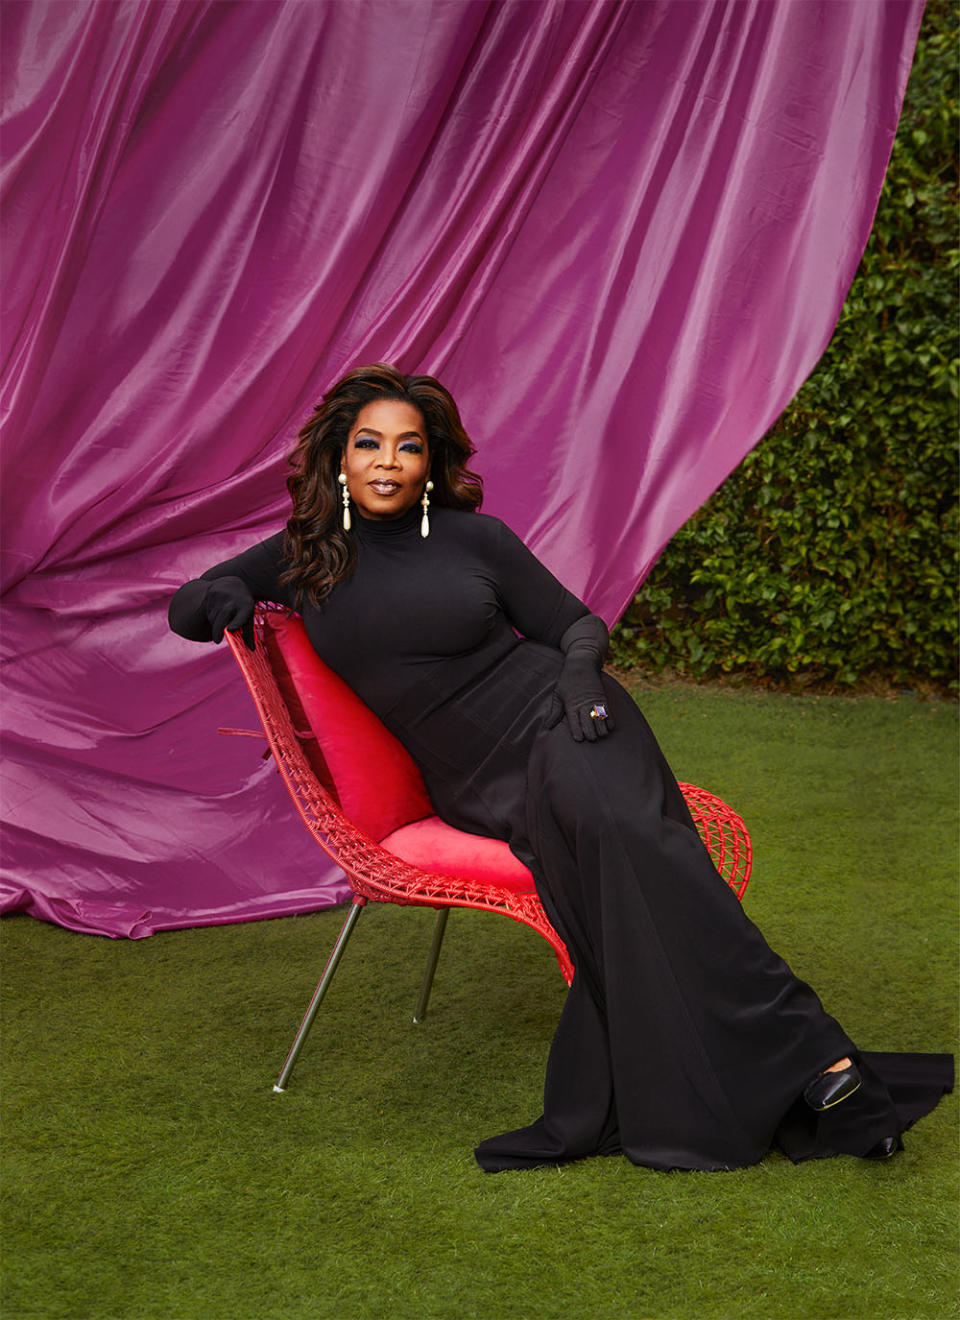 Says producer Oprah Winfrey, “There’s not a person on this film who doesn’t realize it’s bigger than all of us.” All were photographed Dec. 3 at the Houdini Estate in Los Angeles. Oprah Winfrey was styled by Annabelle Harron.